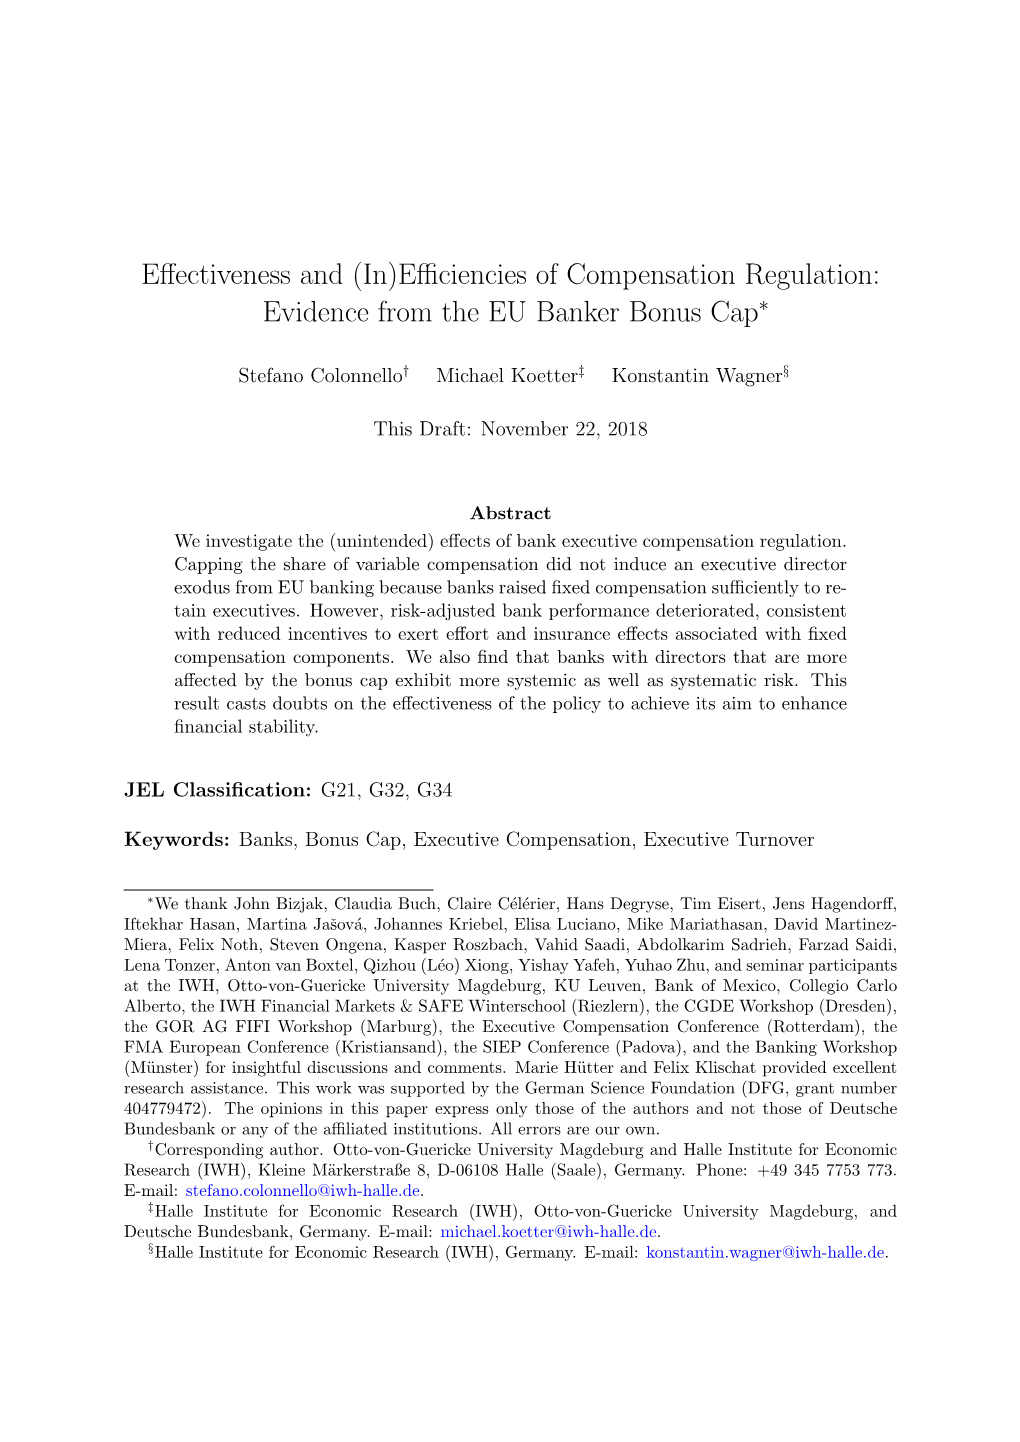 (In)Efficiencies of Compensation Regulation: Evidence from the EU